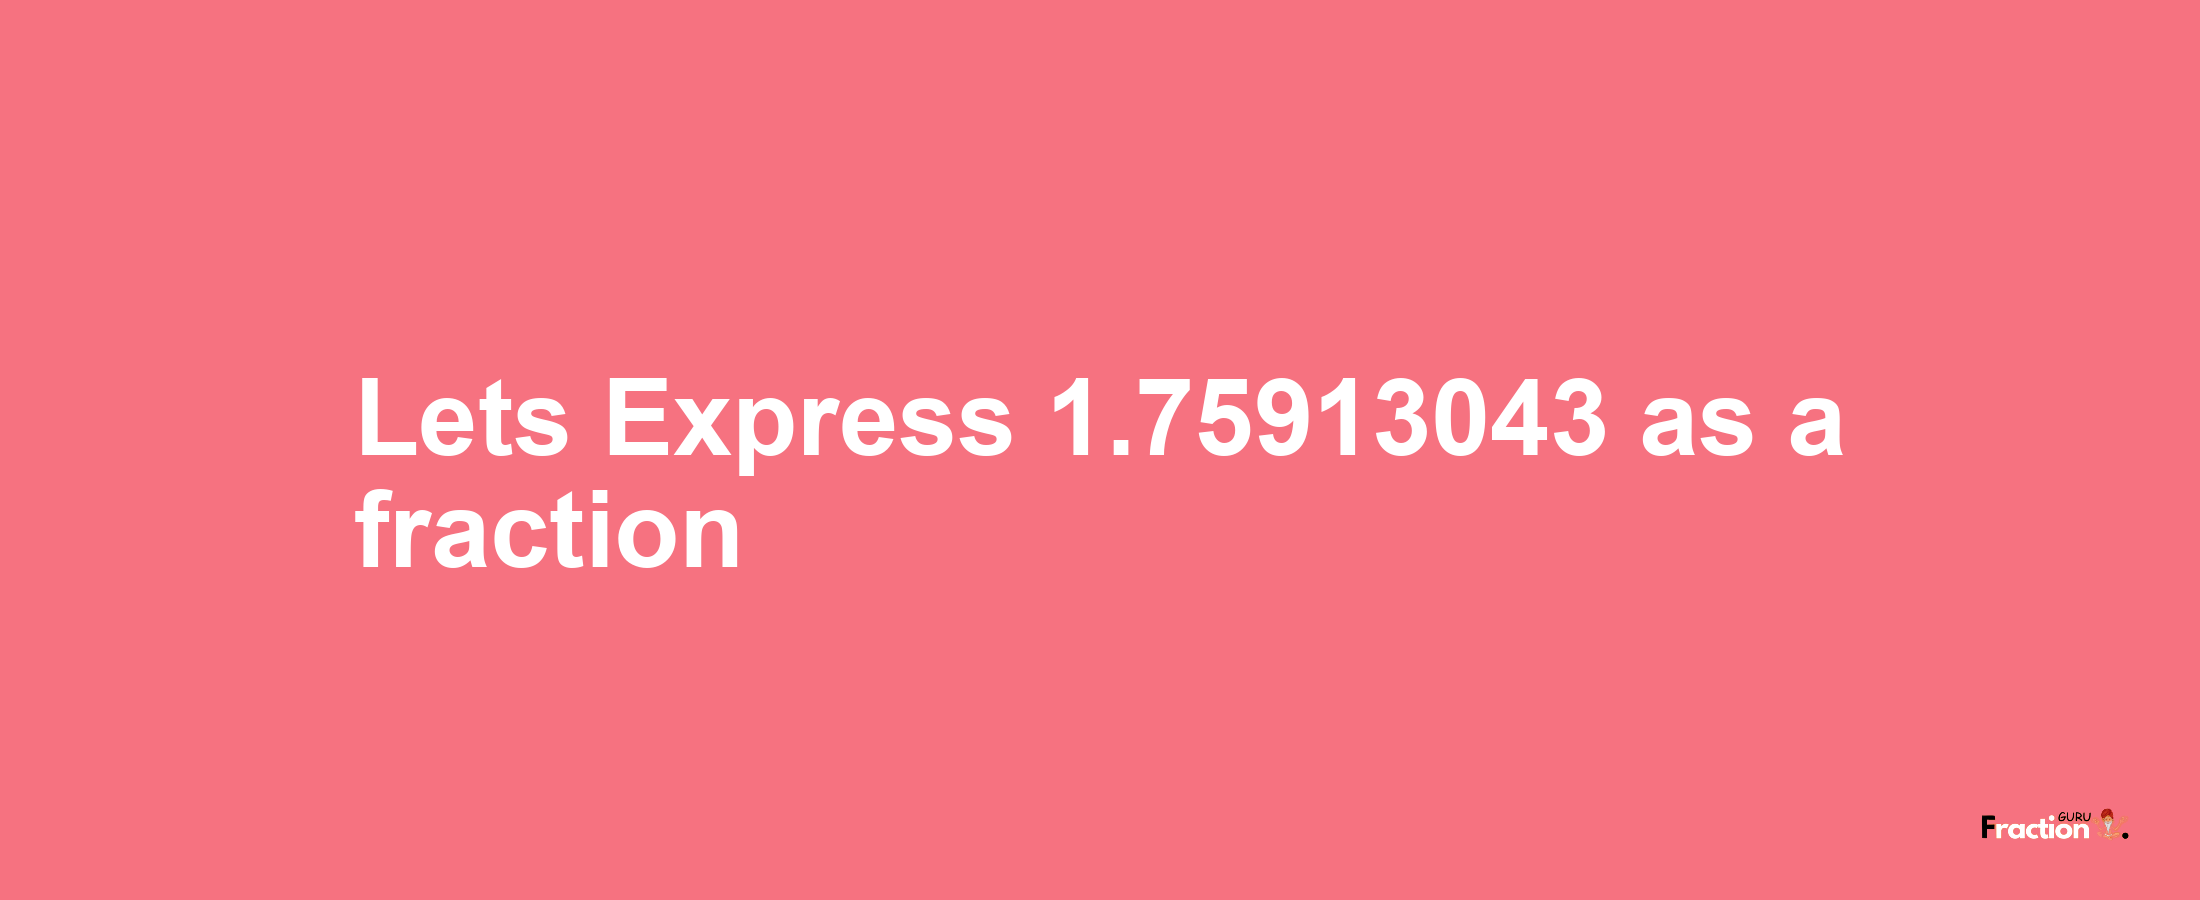 Lets Express 1.75913043 as afraction